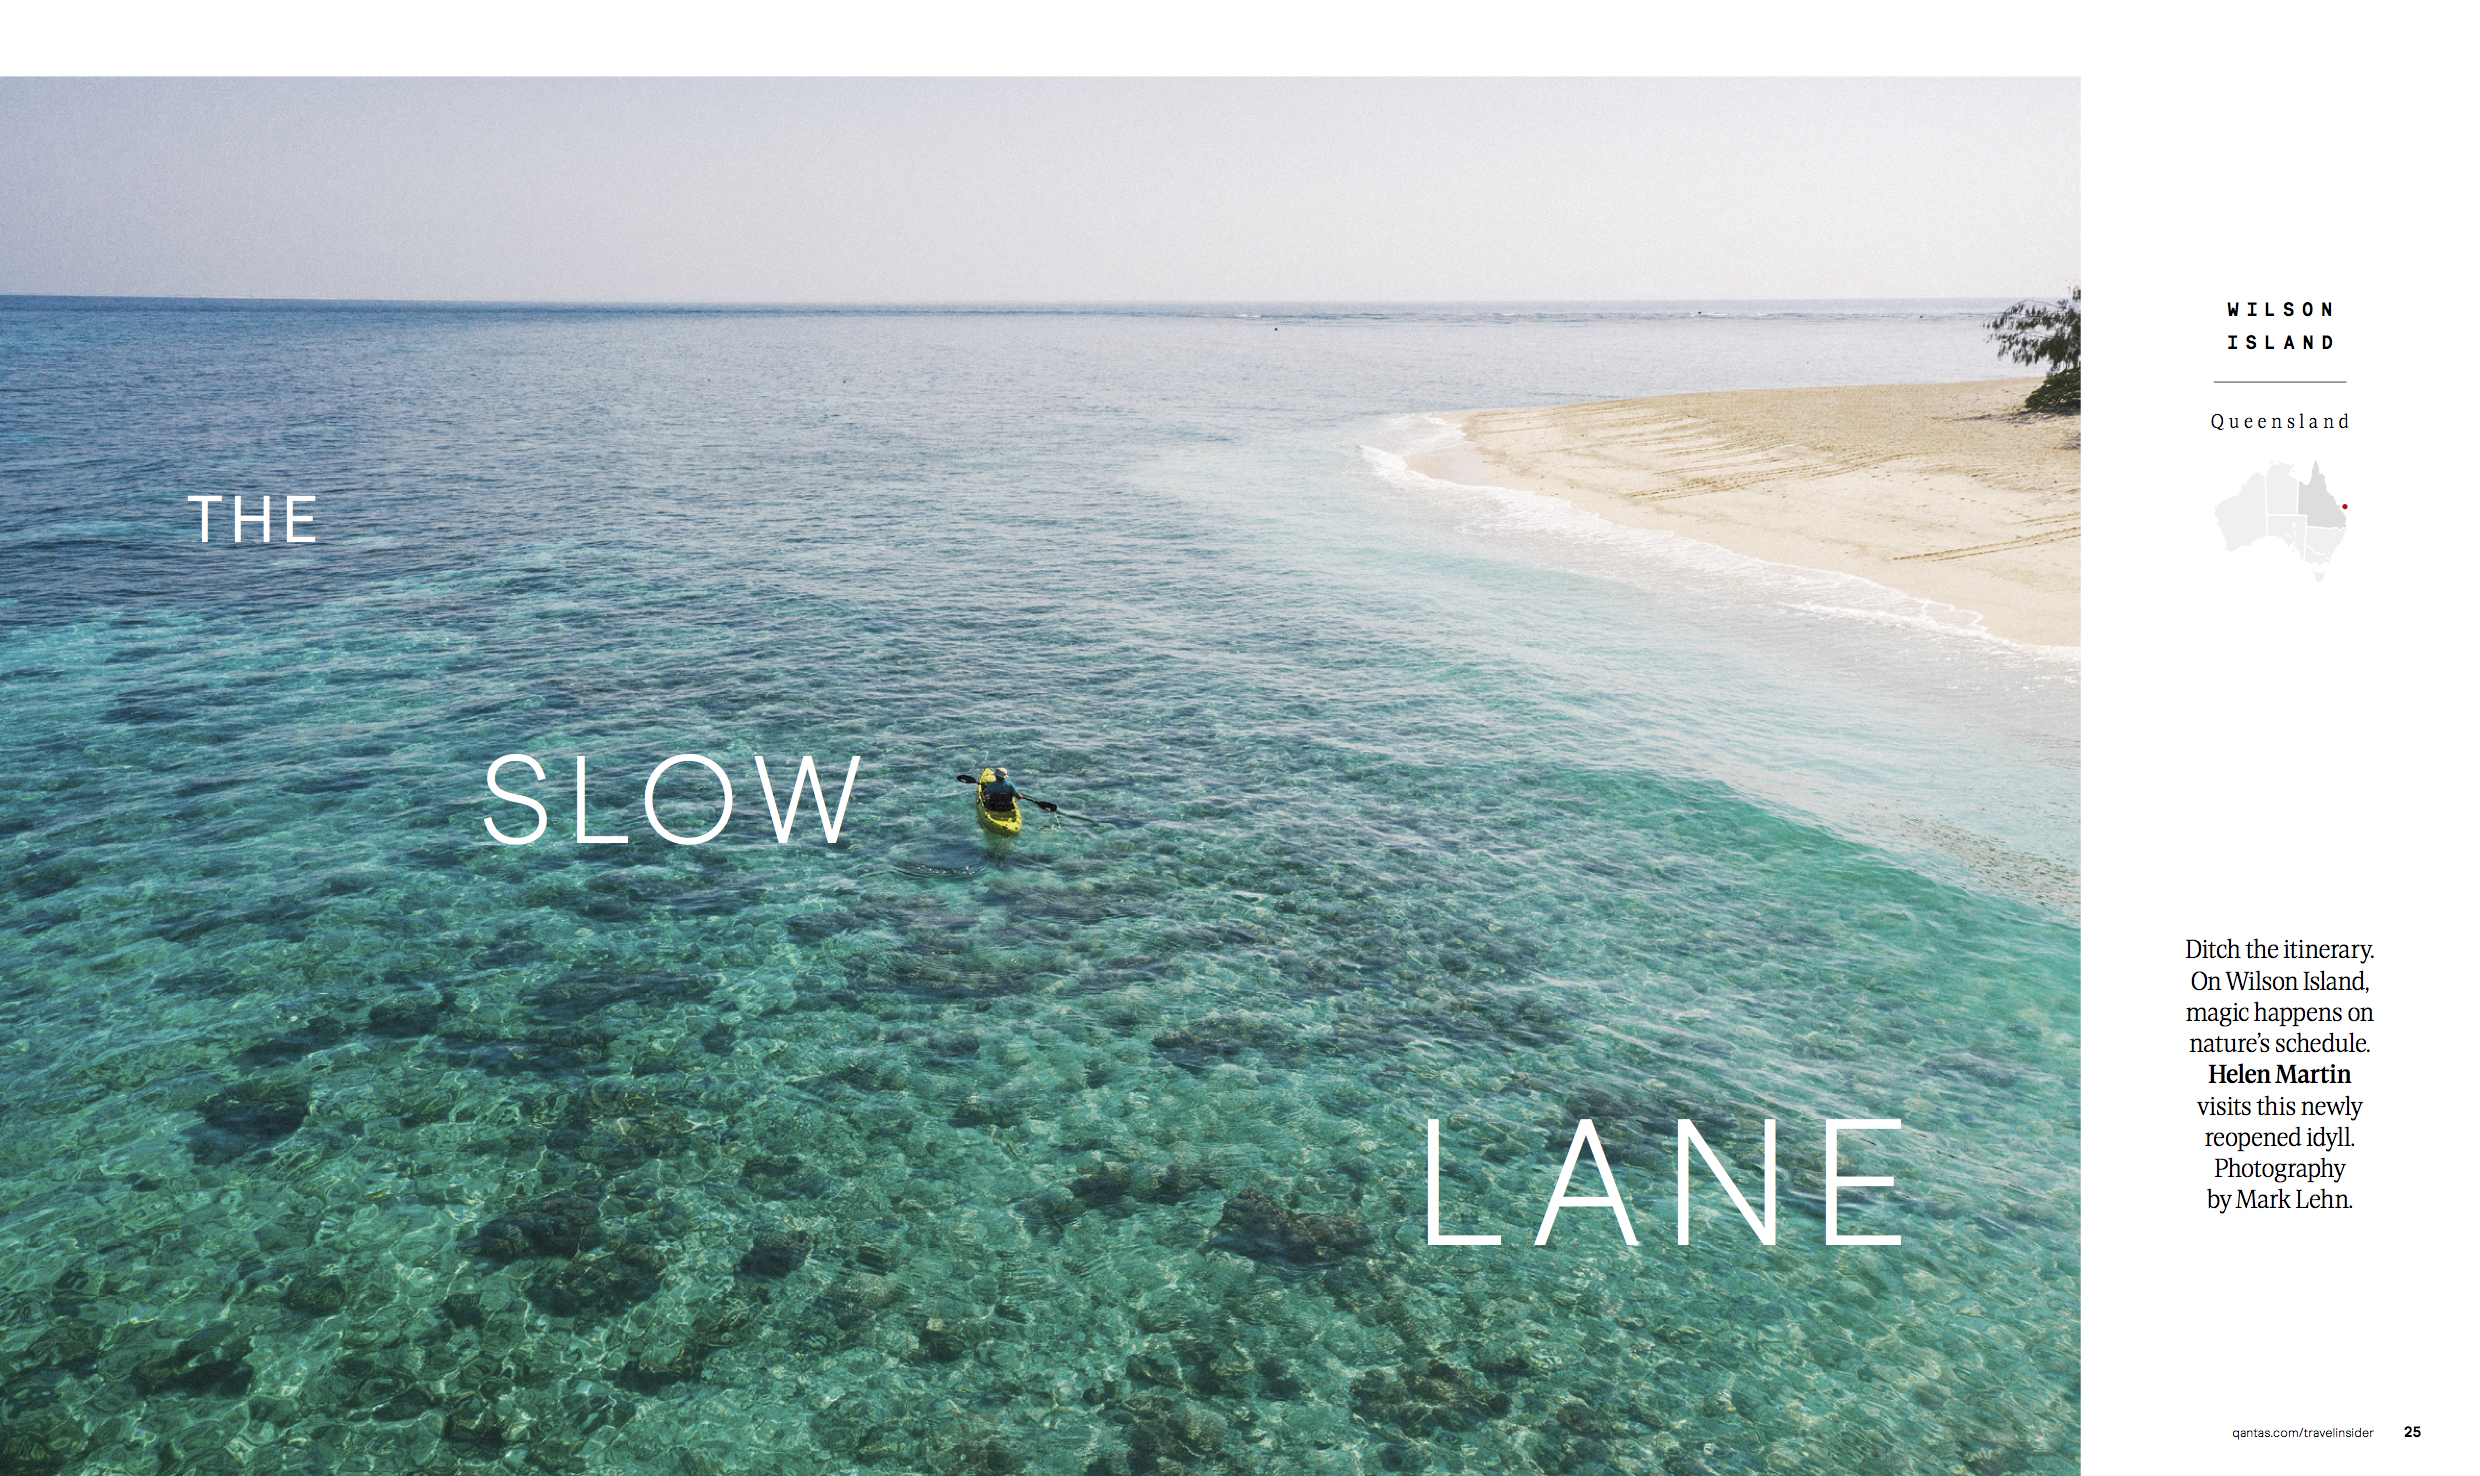 Text "The Slow Lane" is shown over this Mark Lehn shot of a kayaker off the coast of Wilson Island